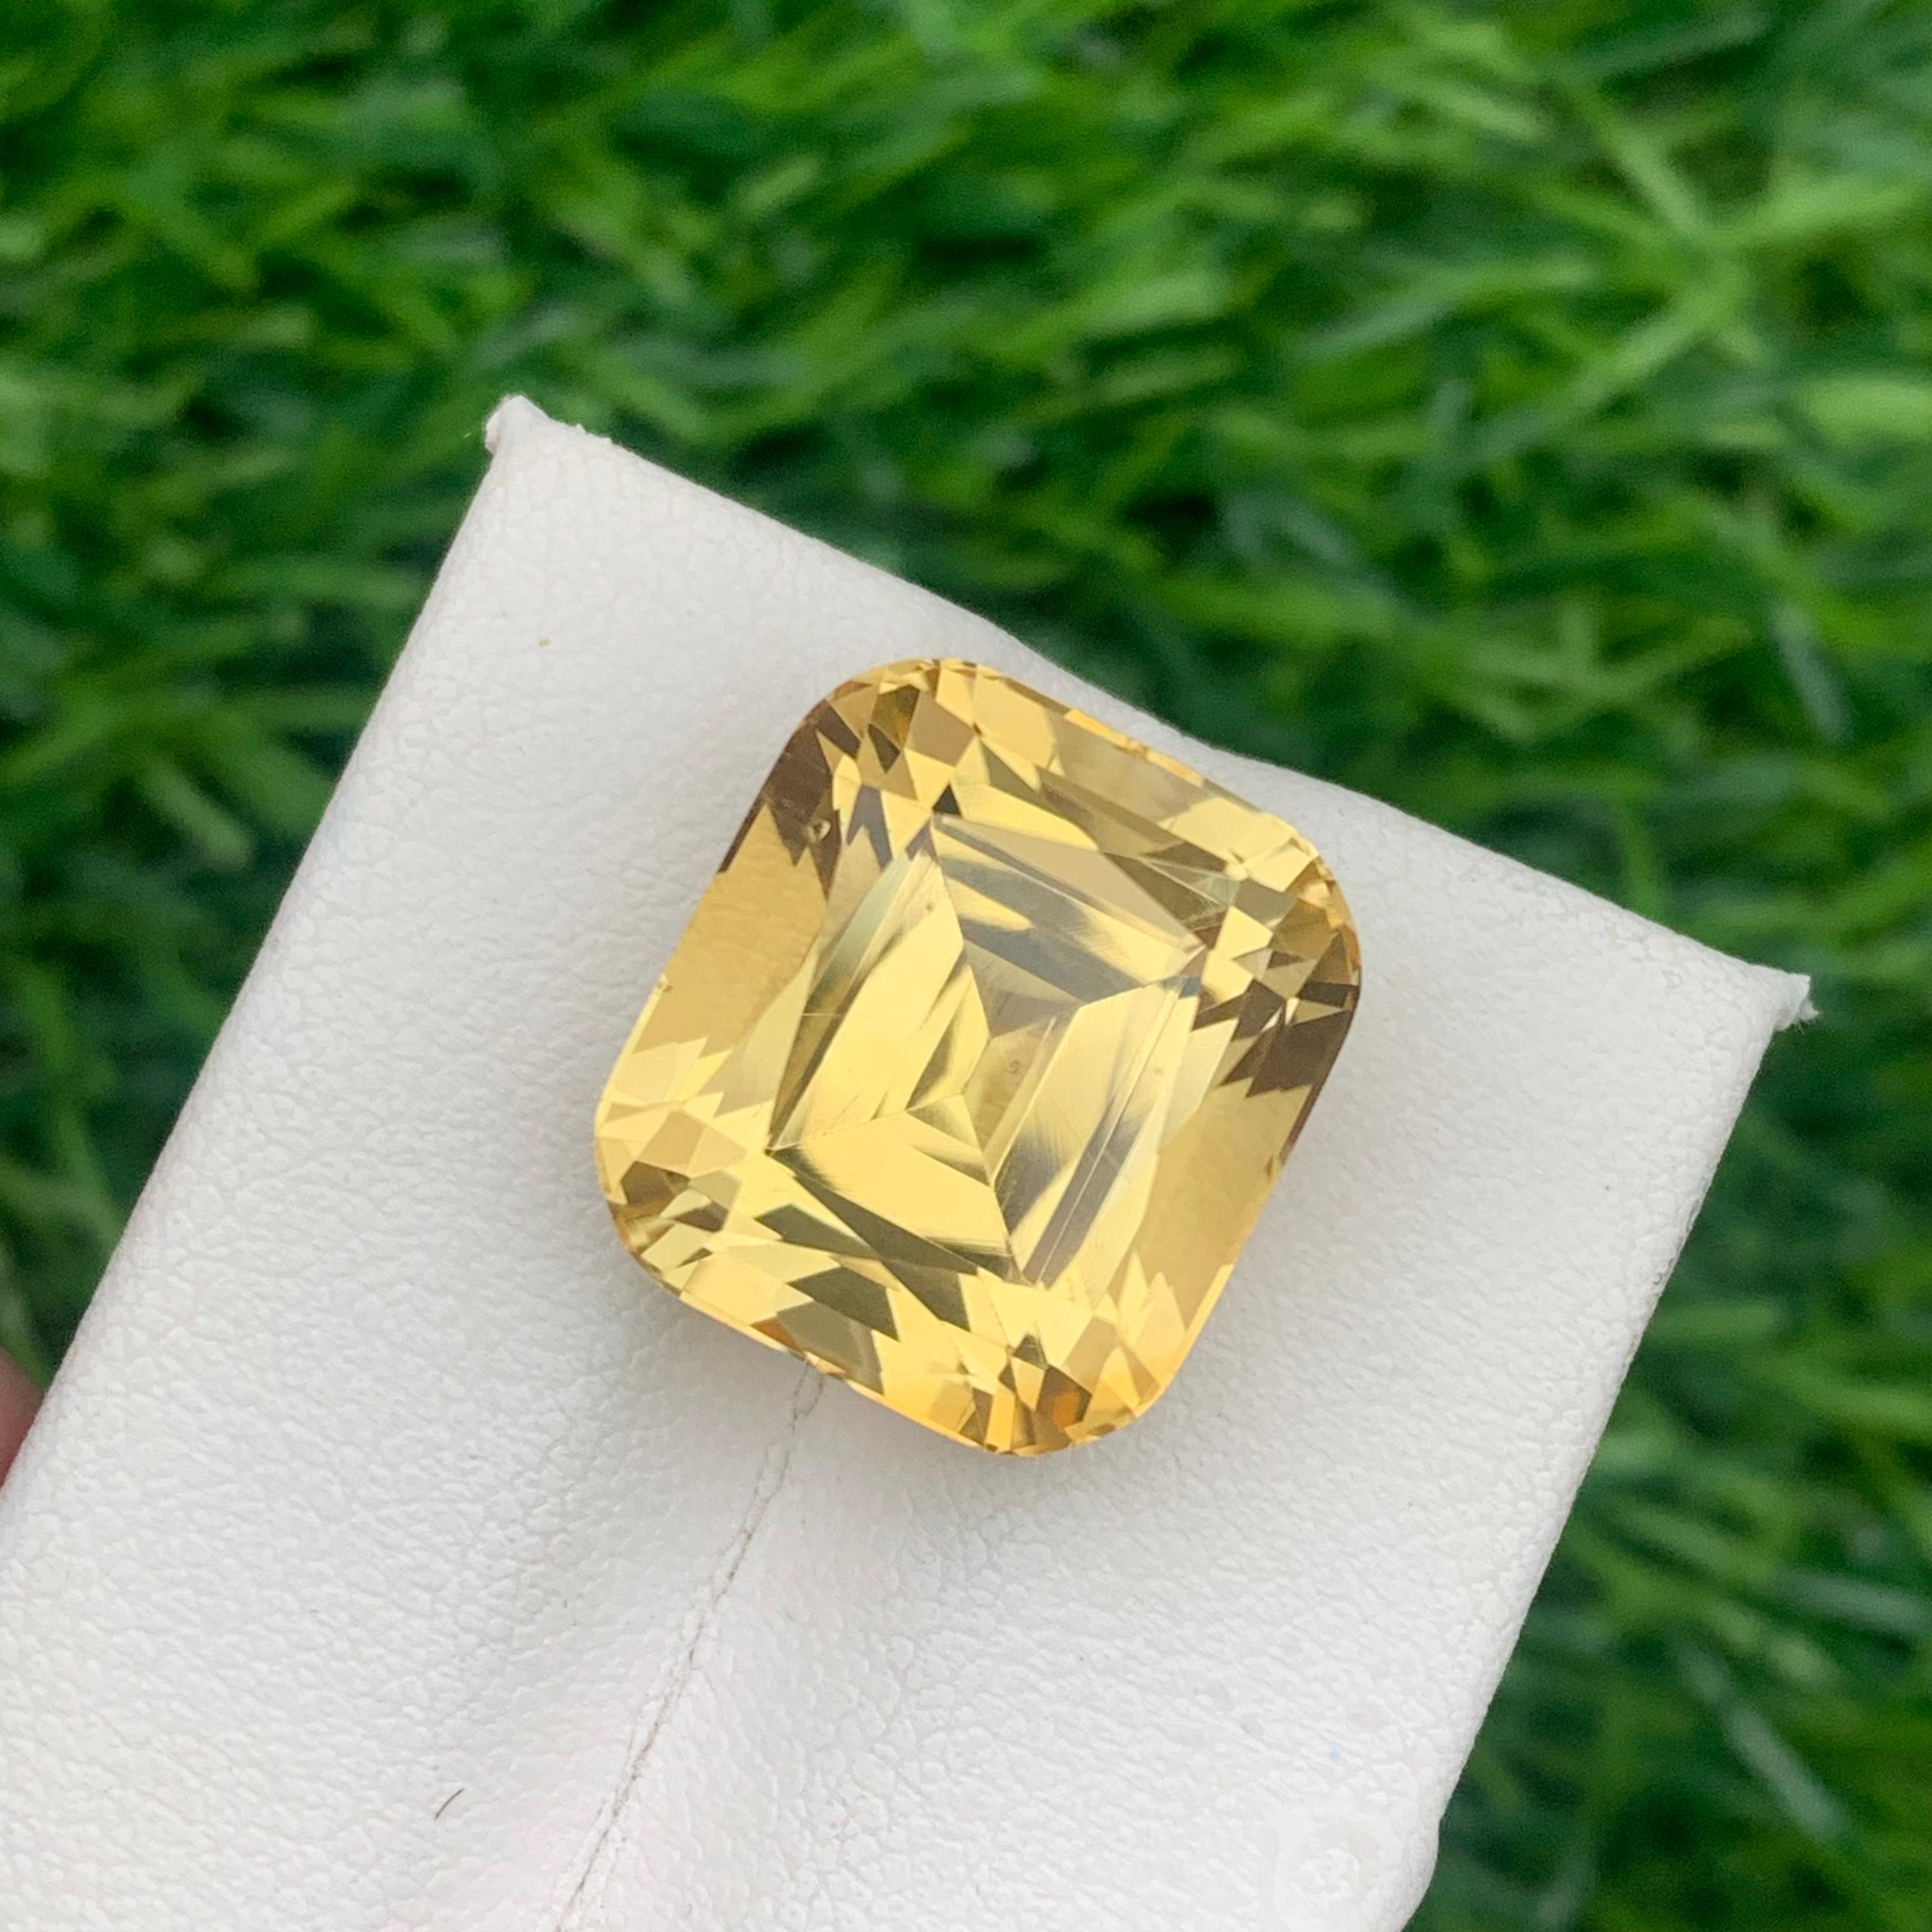 18.70 Carat Natural Loose Yellow Citrine Gemstone From Brazil Mine Cushion Cut For Sale 2